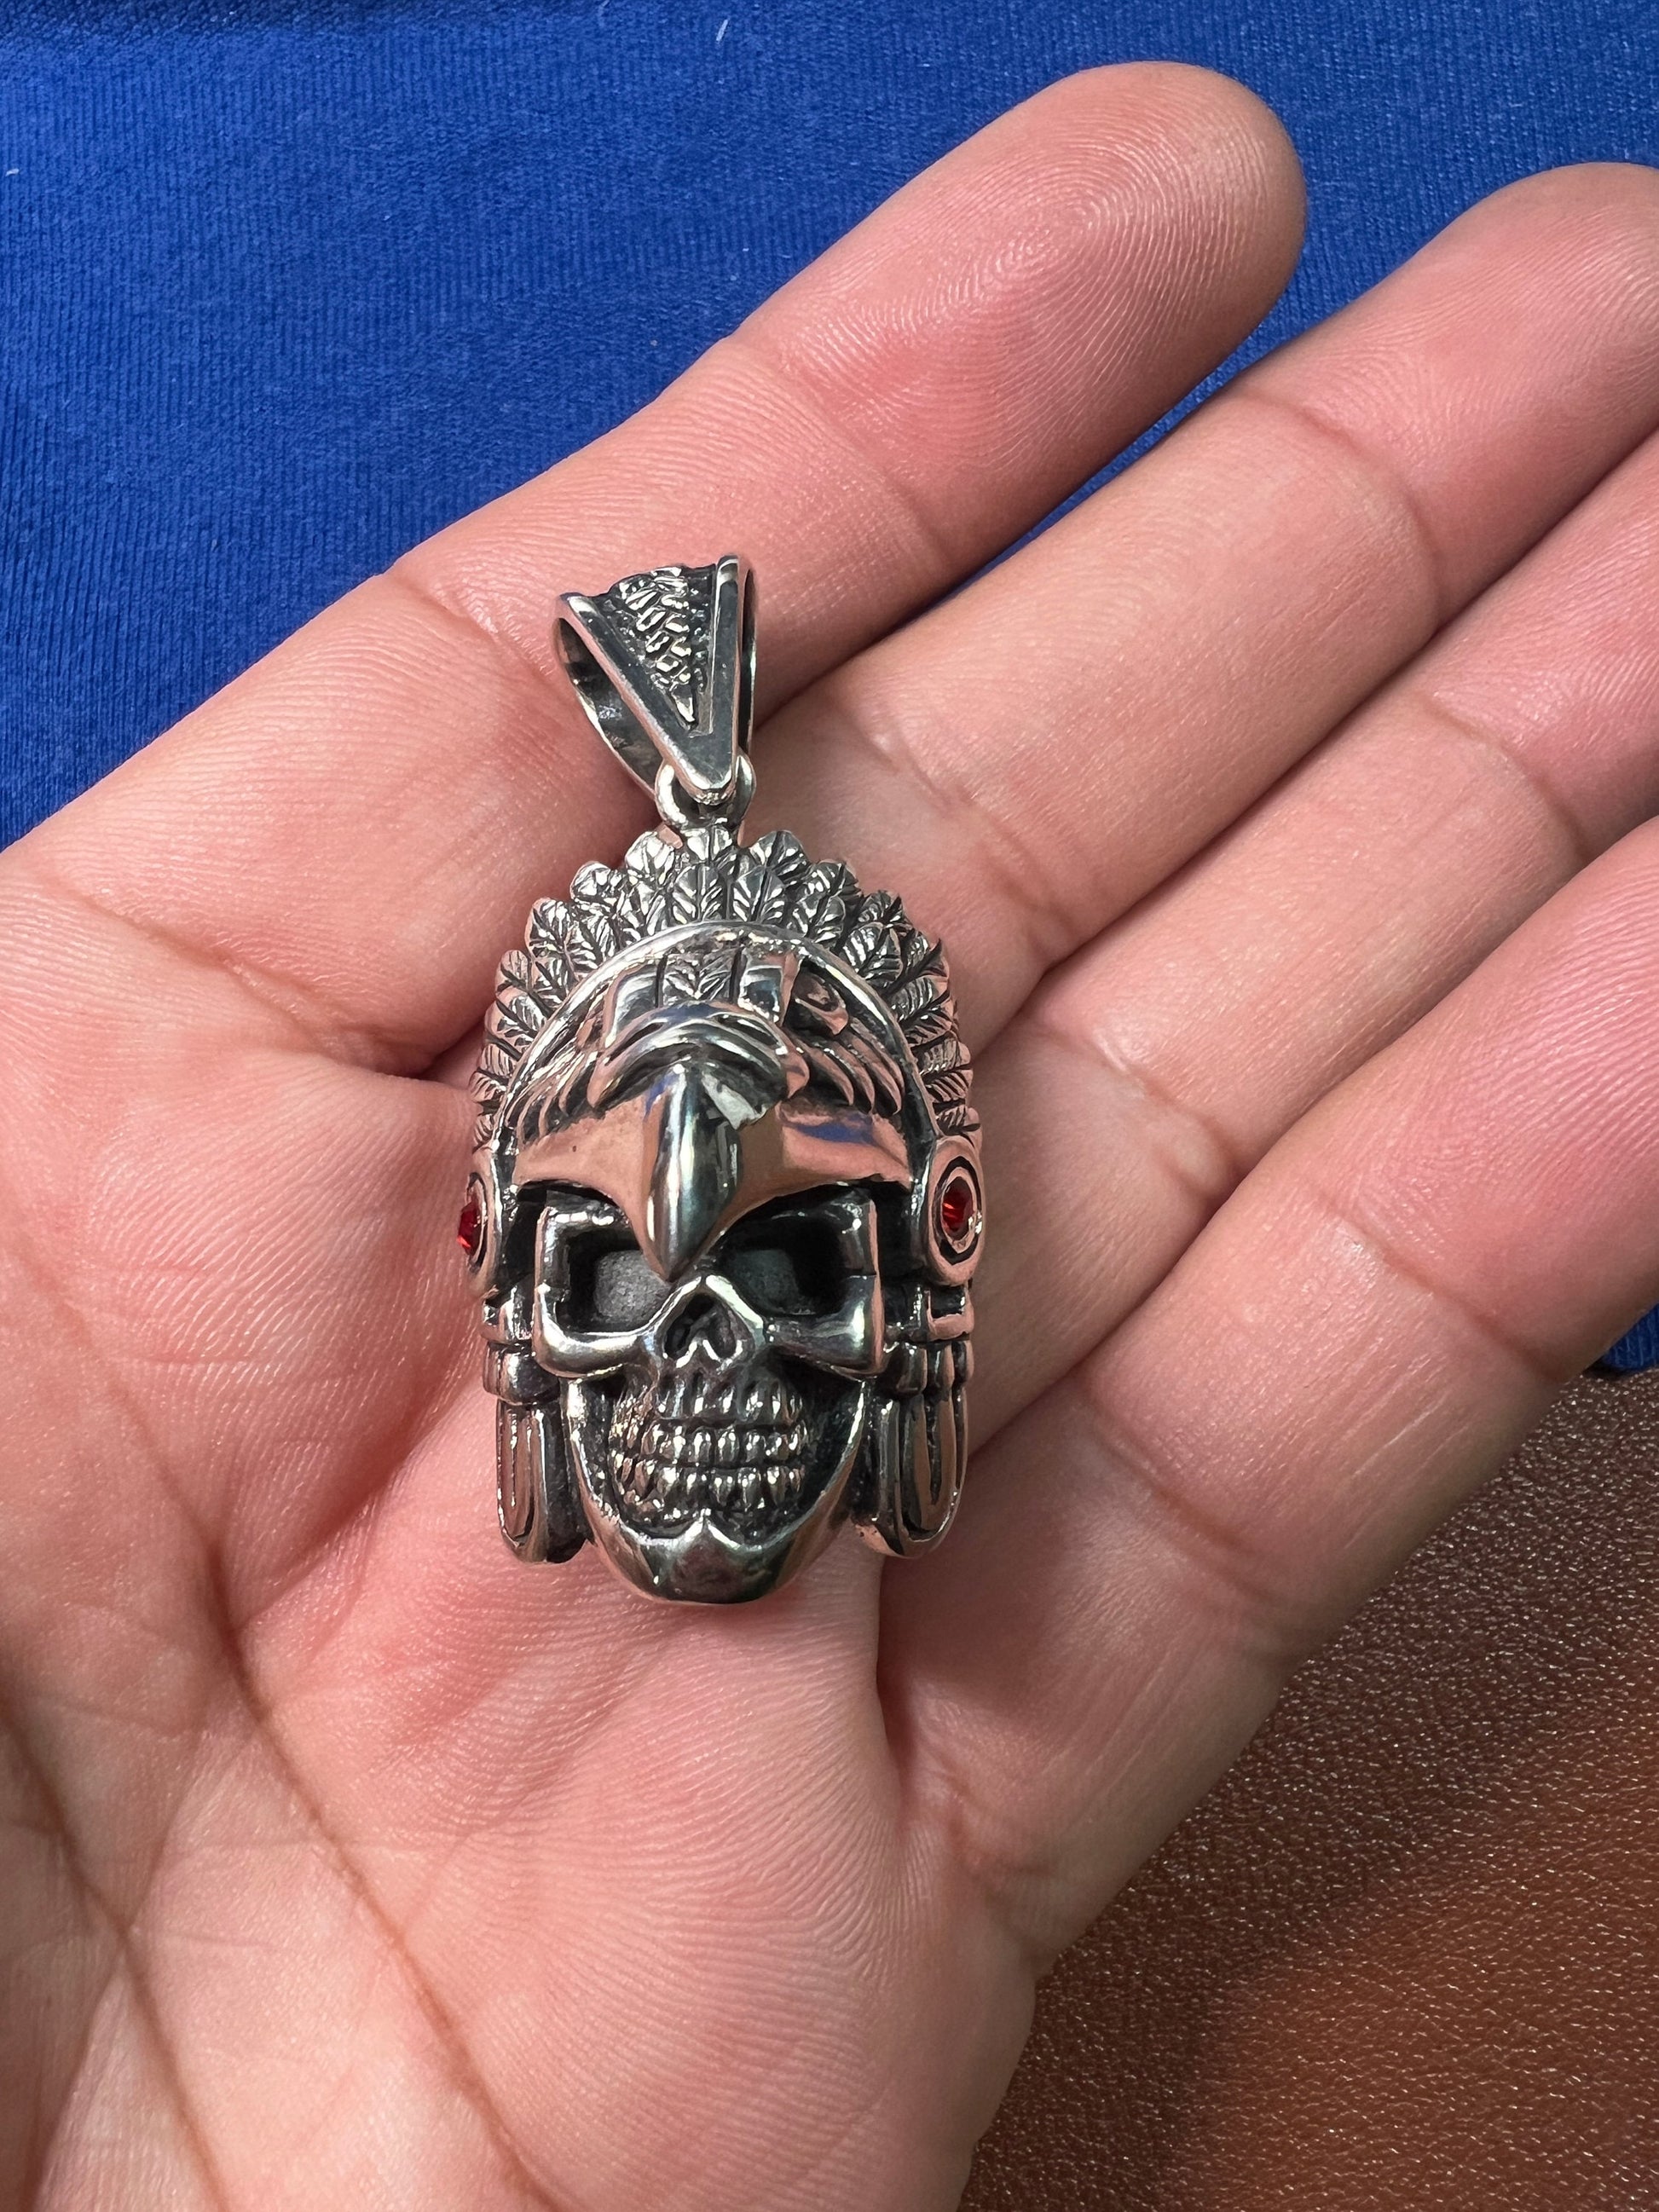 Eagle Warrior Pendant, Red Zirconia, Azteca, Maya, Sterling Silver, from Mexico 22.41 grams (#60)